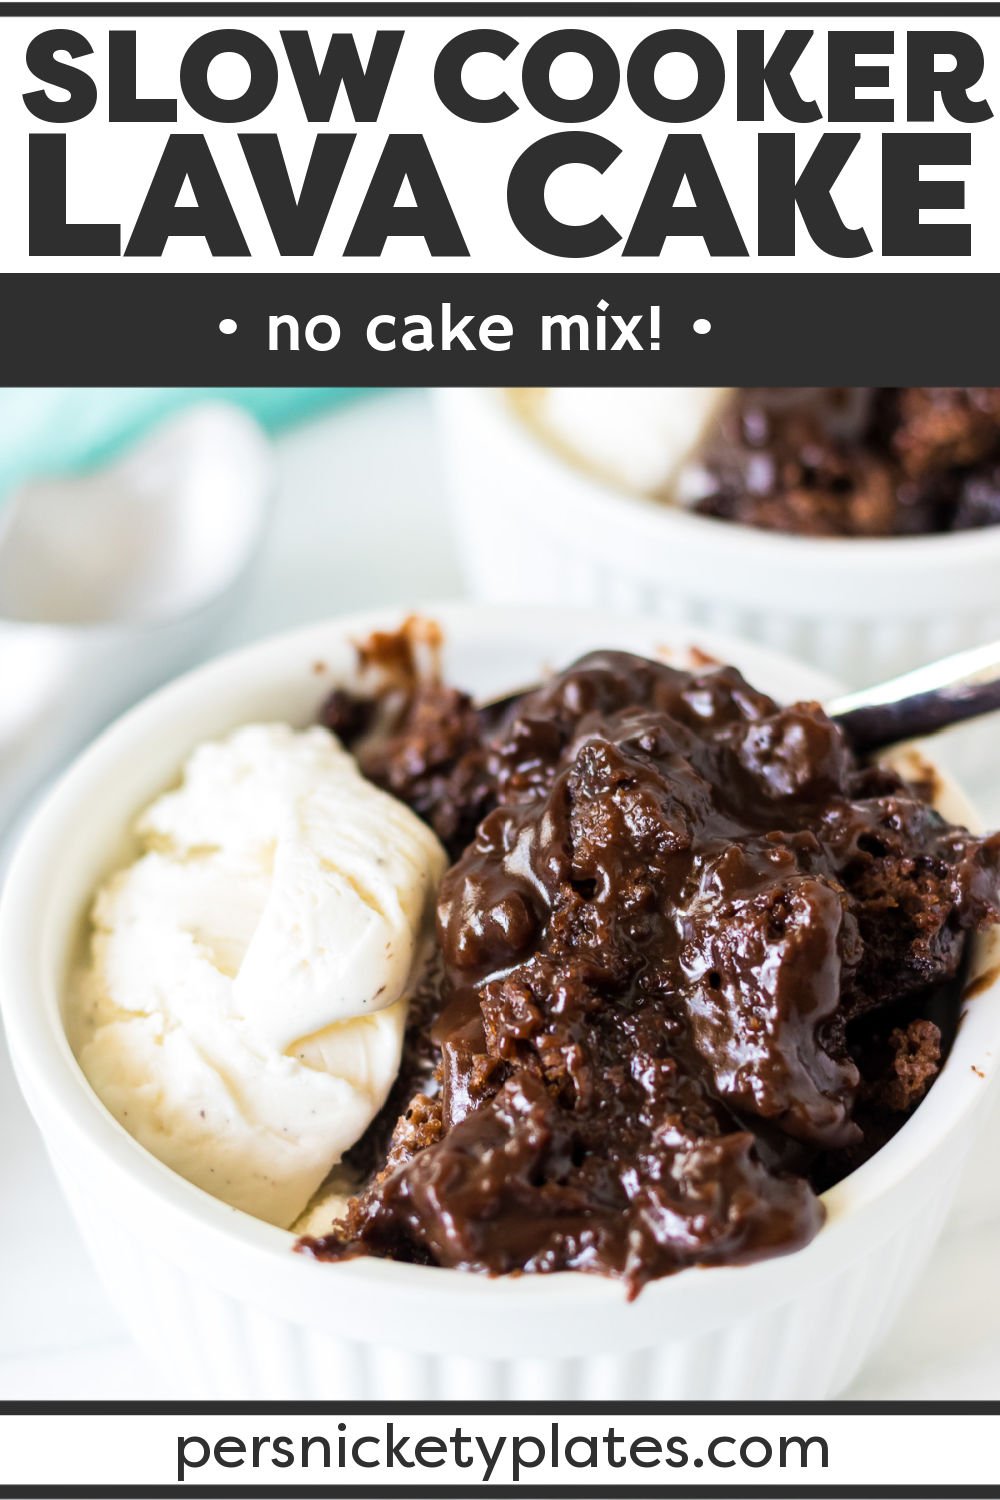 This Slow Cooker Chocolate Lava Cake is made entirely from scratch in the crockpot! Warm chocolate cake with a gooey center, filled with dark chocolate chips and then topped with a scoop of vanilla ice cream making a rich dessert that the entire family will love! | www.persnicketyplates.com